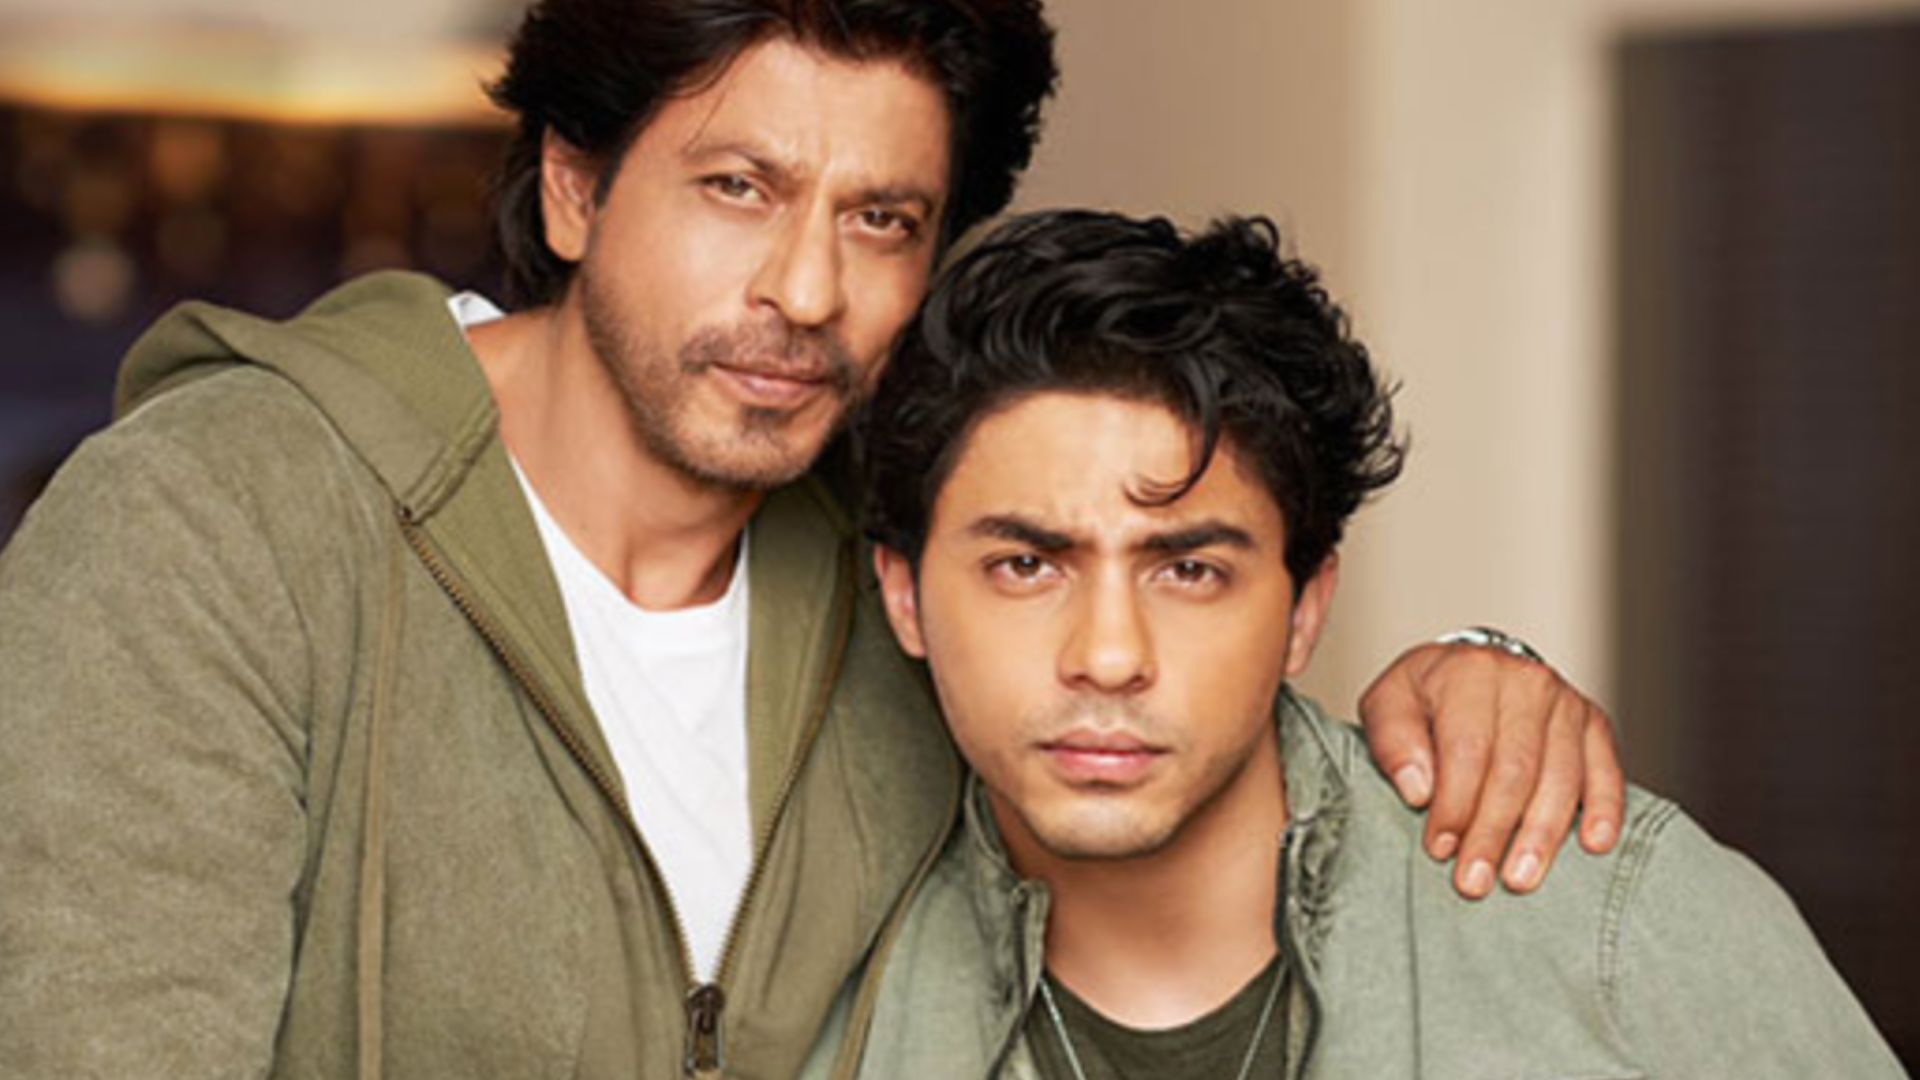 Speaking candidly about Aryan Khan’s arrest, Shah Rukh Khan describes it as ‘bothersome, unpleasant’: ‘When you think everything is good, life will come and hit you’